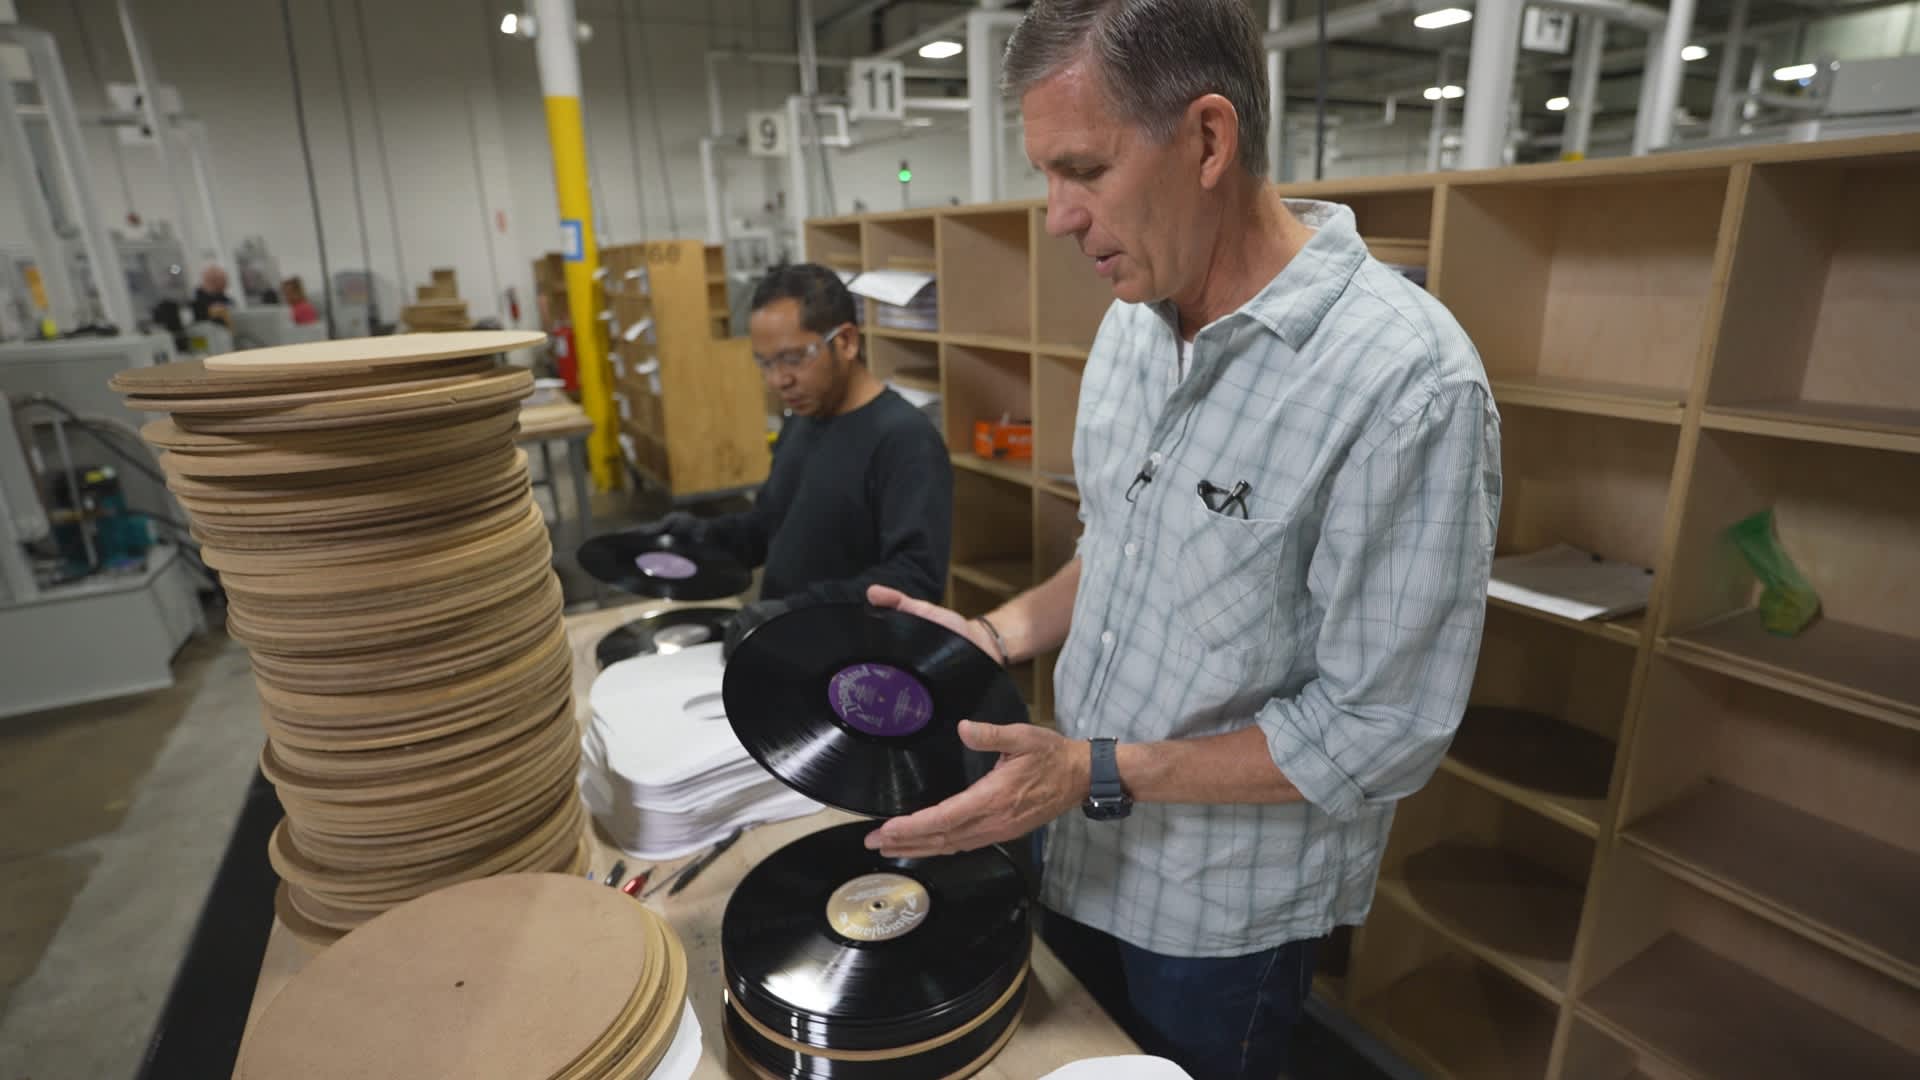 United Record Pressing CEO Mark Michaels inspecting a vinyl record.